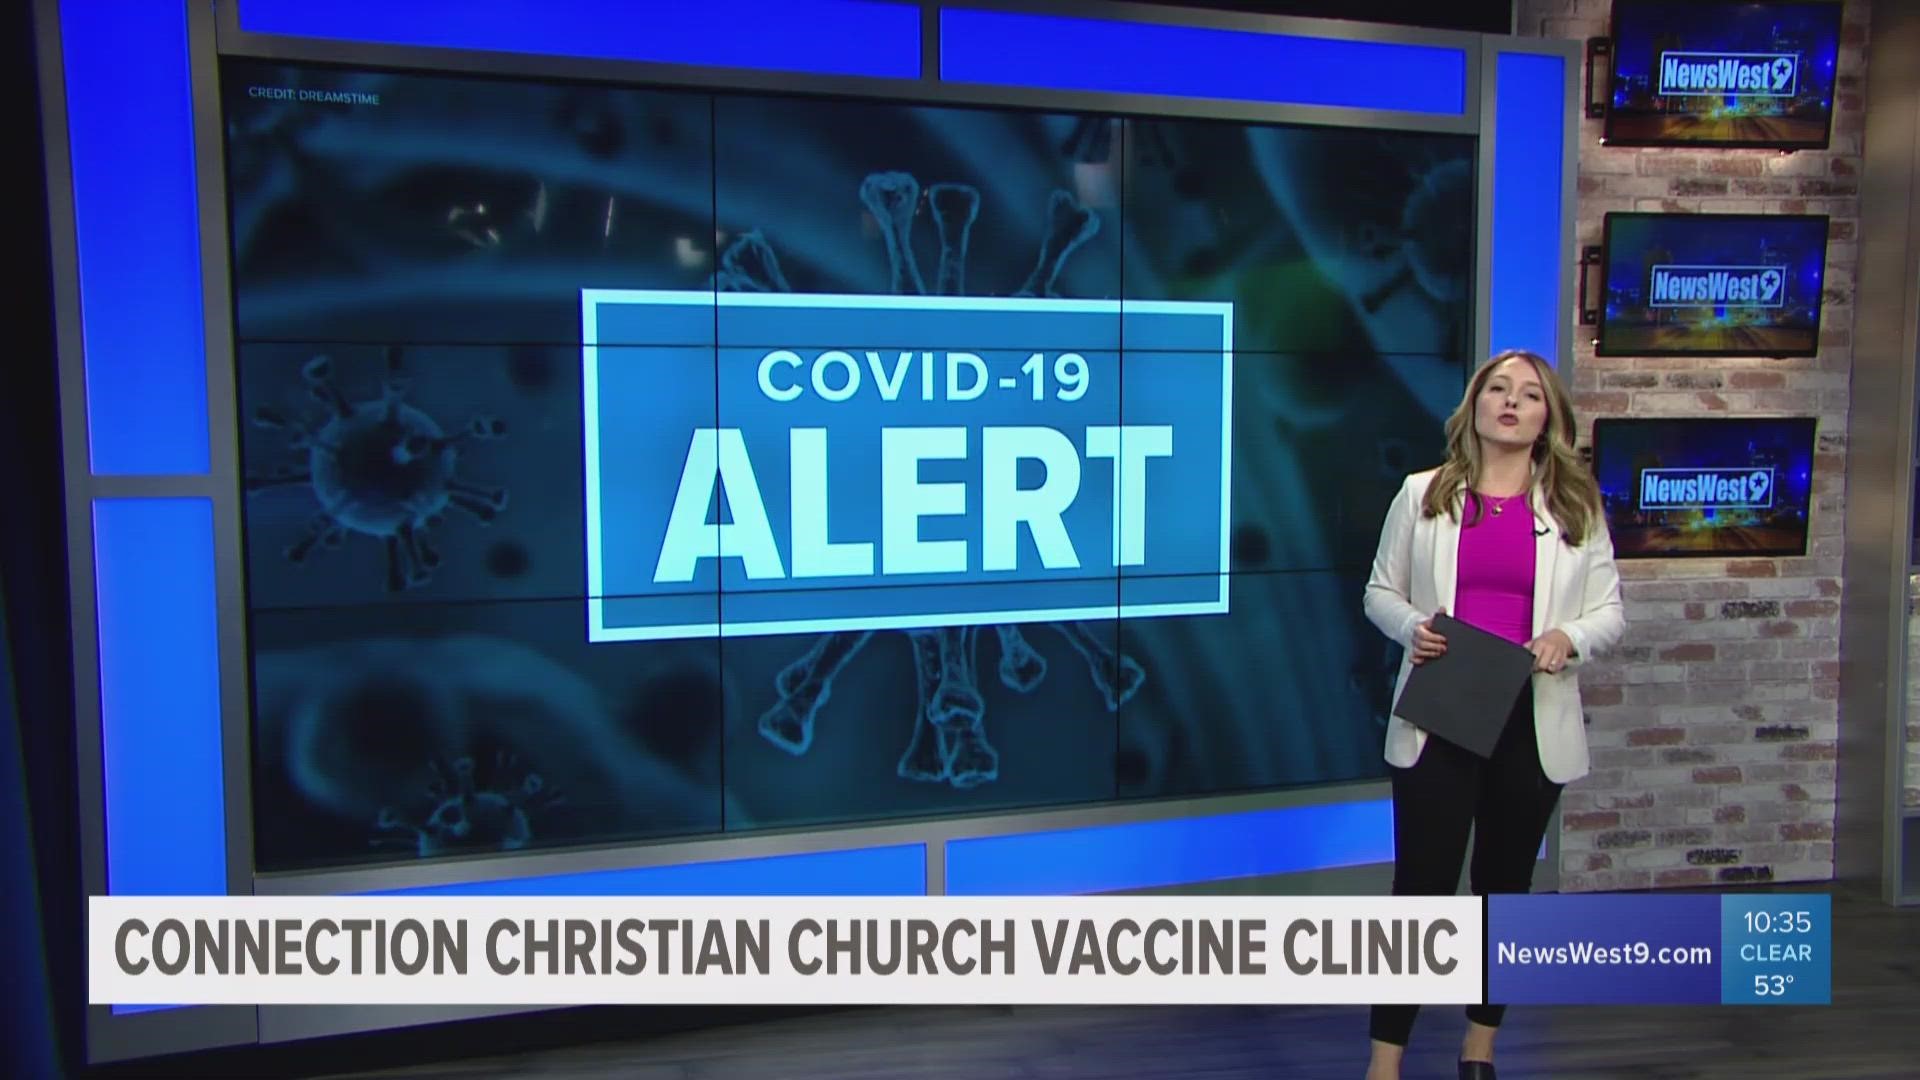 COVID-19 and flu shots will be offered for children and adults.